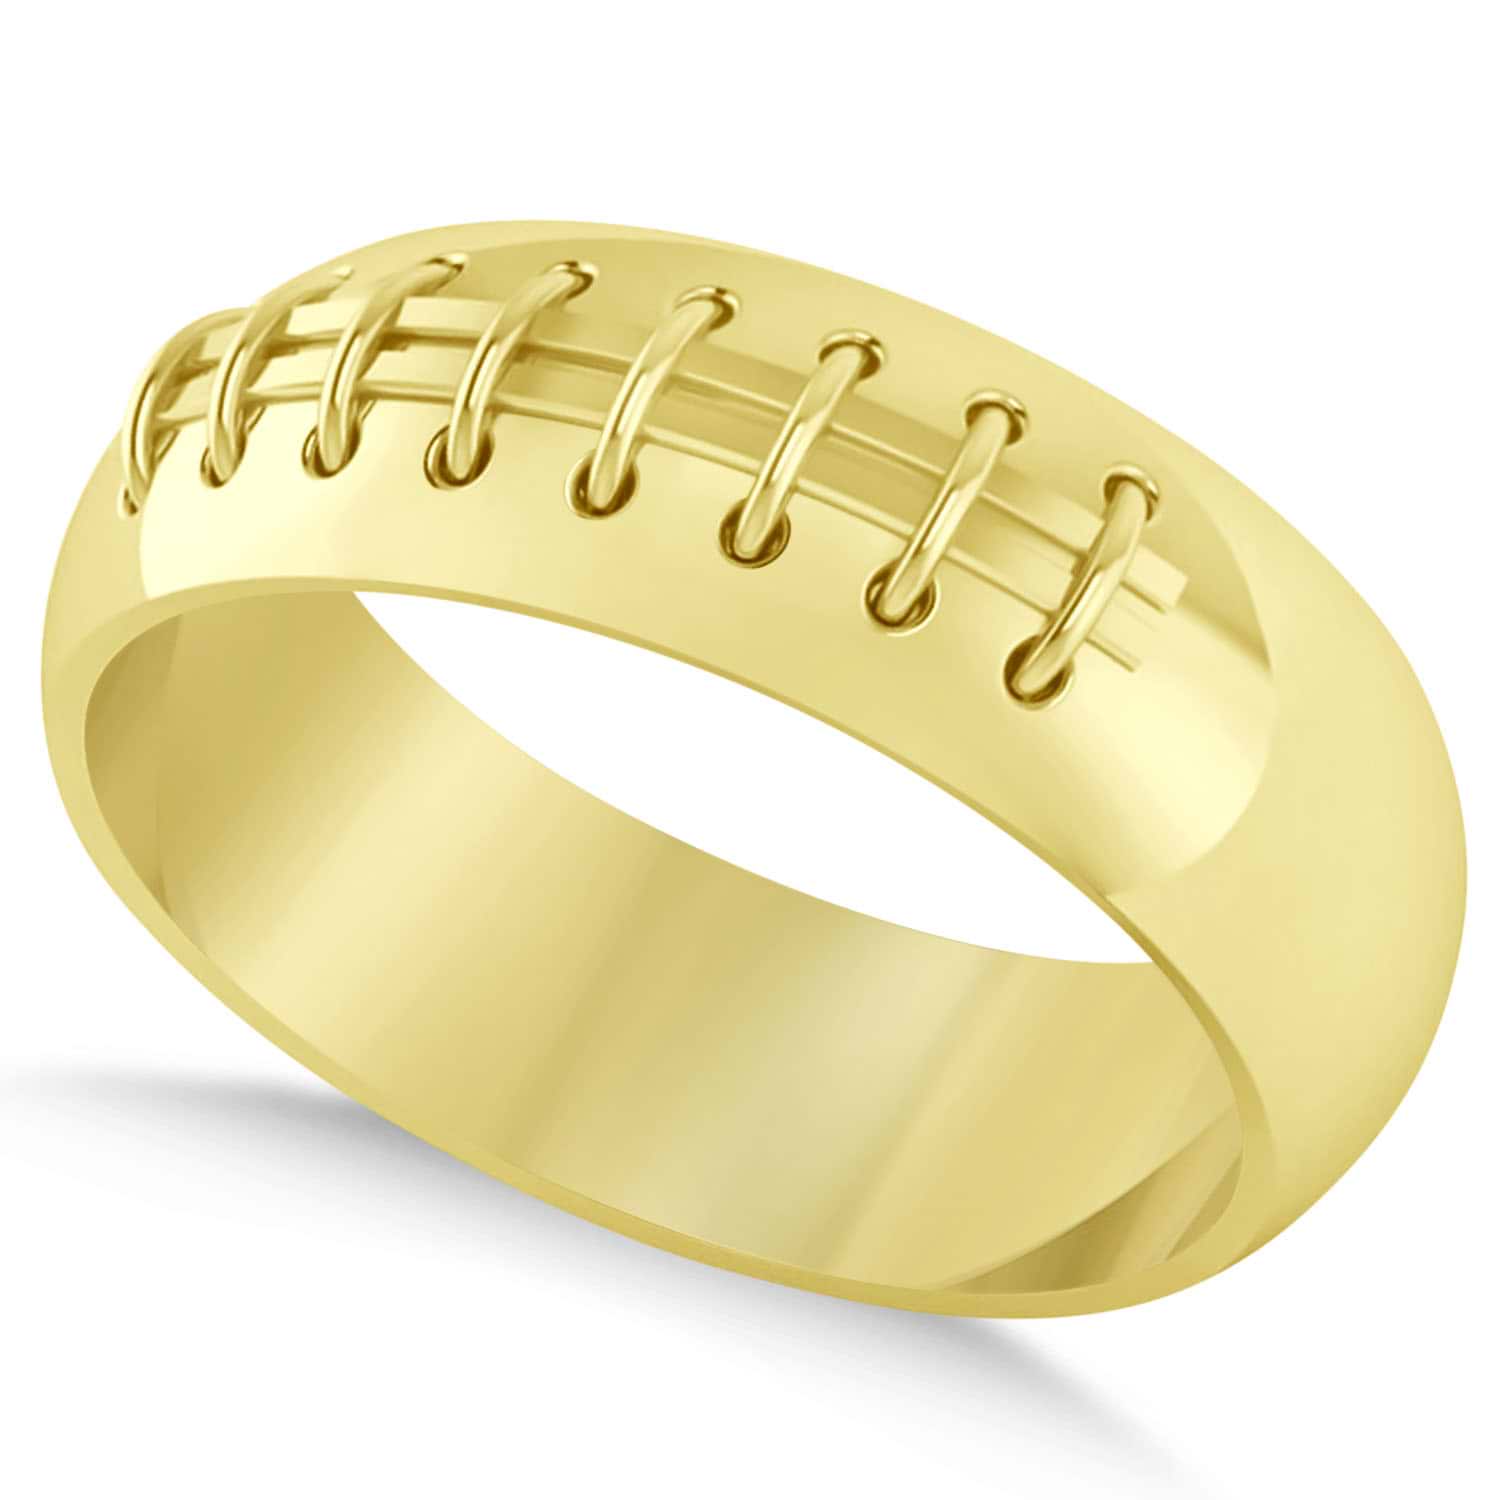 Men's Football Carved Sports Band Ring 14k Yellow Gold